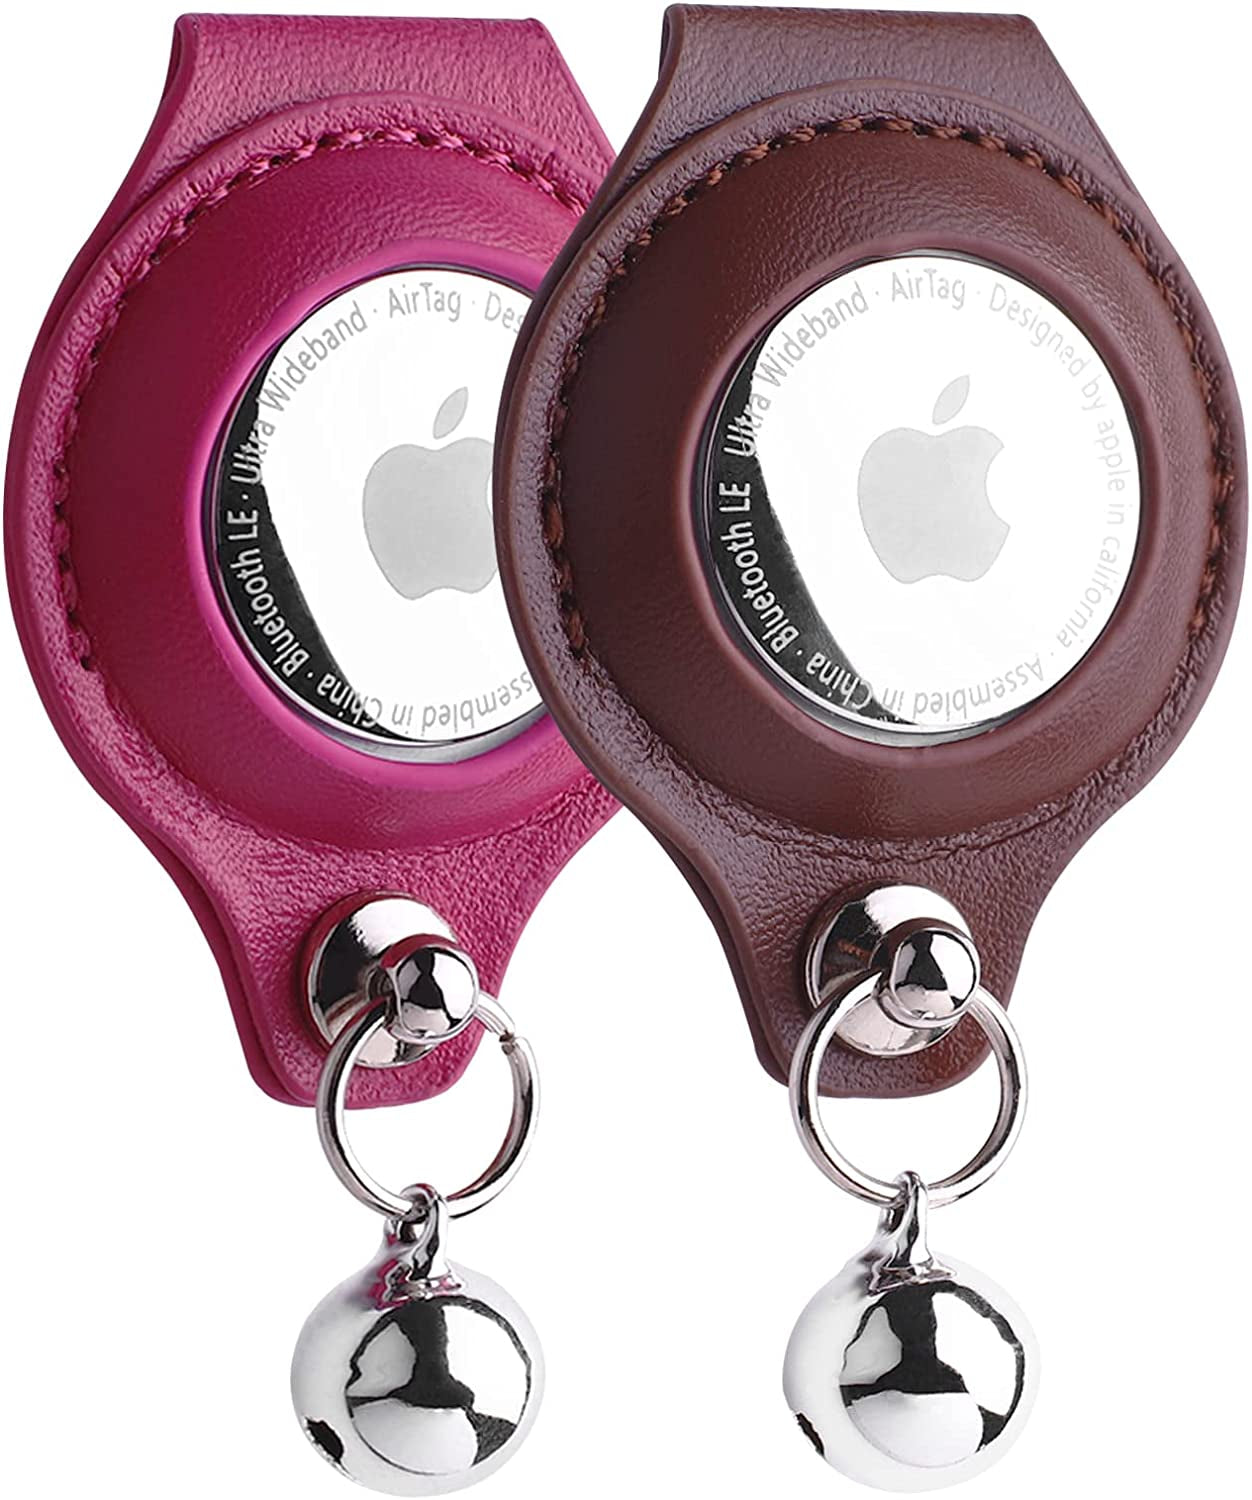 Decorbea Airtag Holder- Airtag Dog Collar Holder(2 Pack)- Dog Airtag Holder in Fashionable Design -PU Leather Pet Collar Case for Apple Airtags